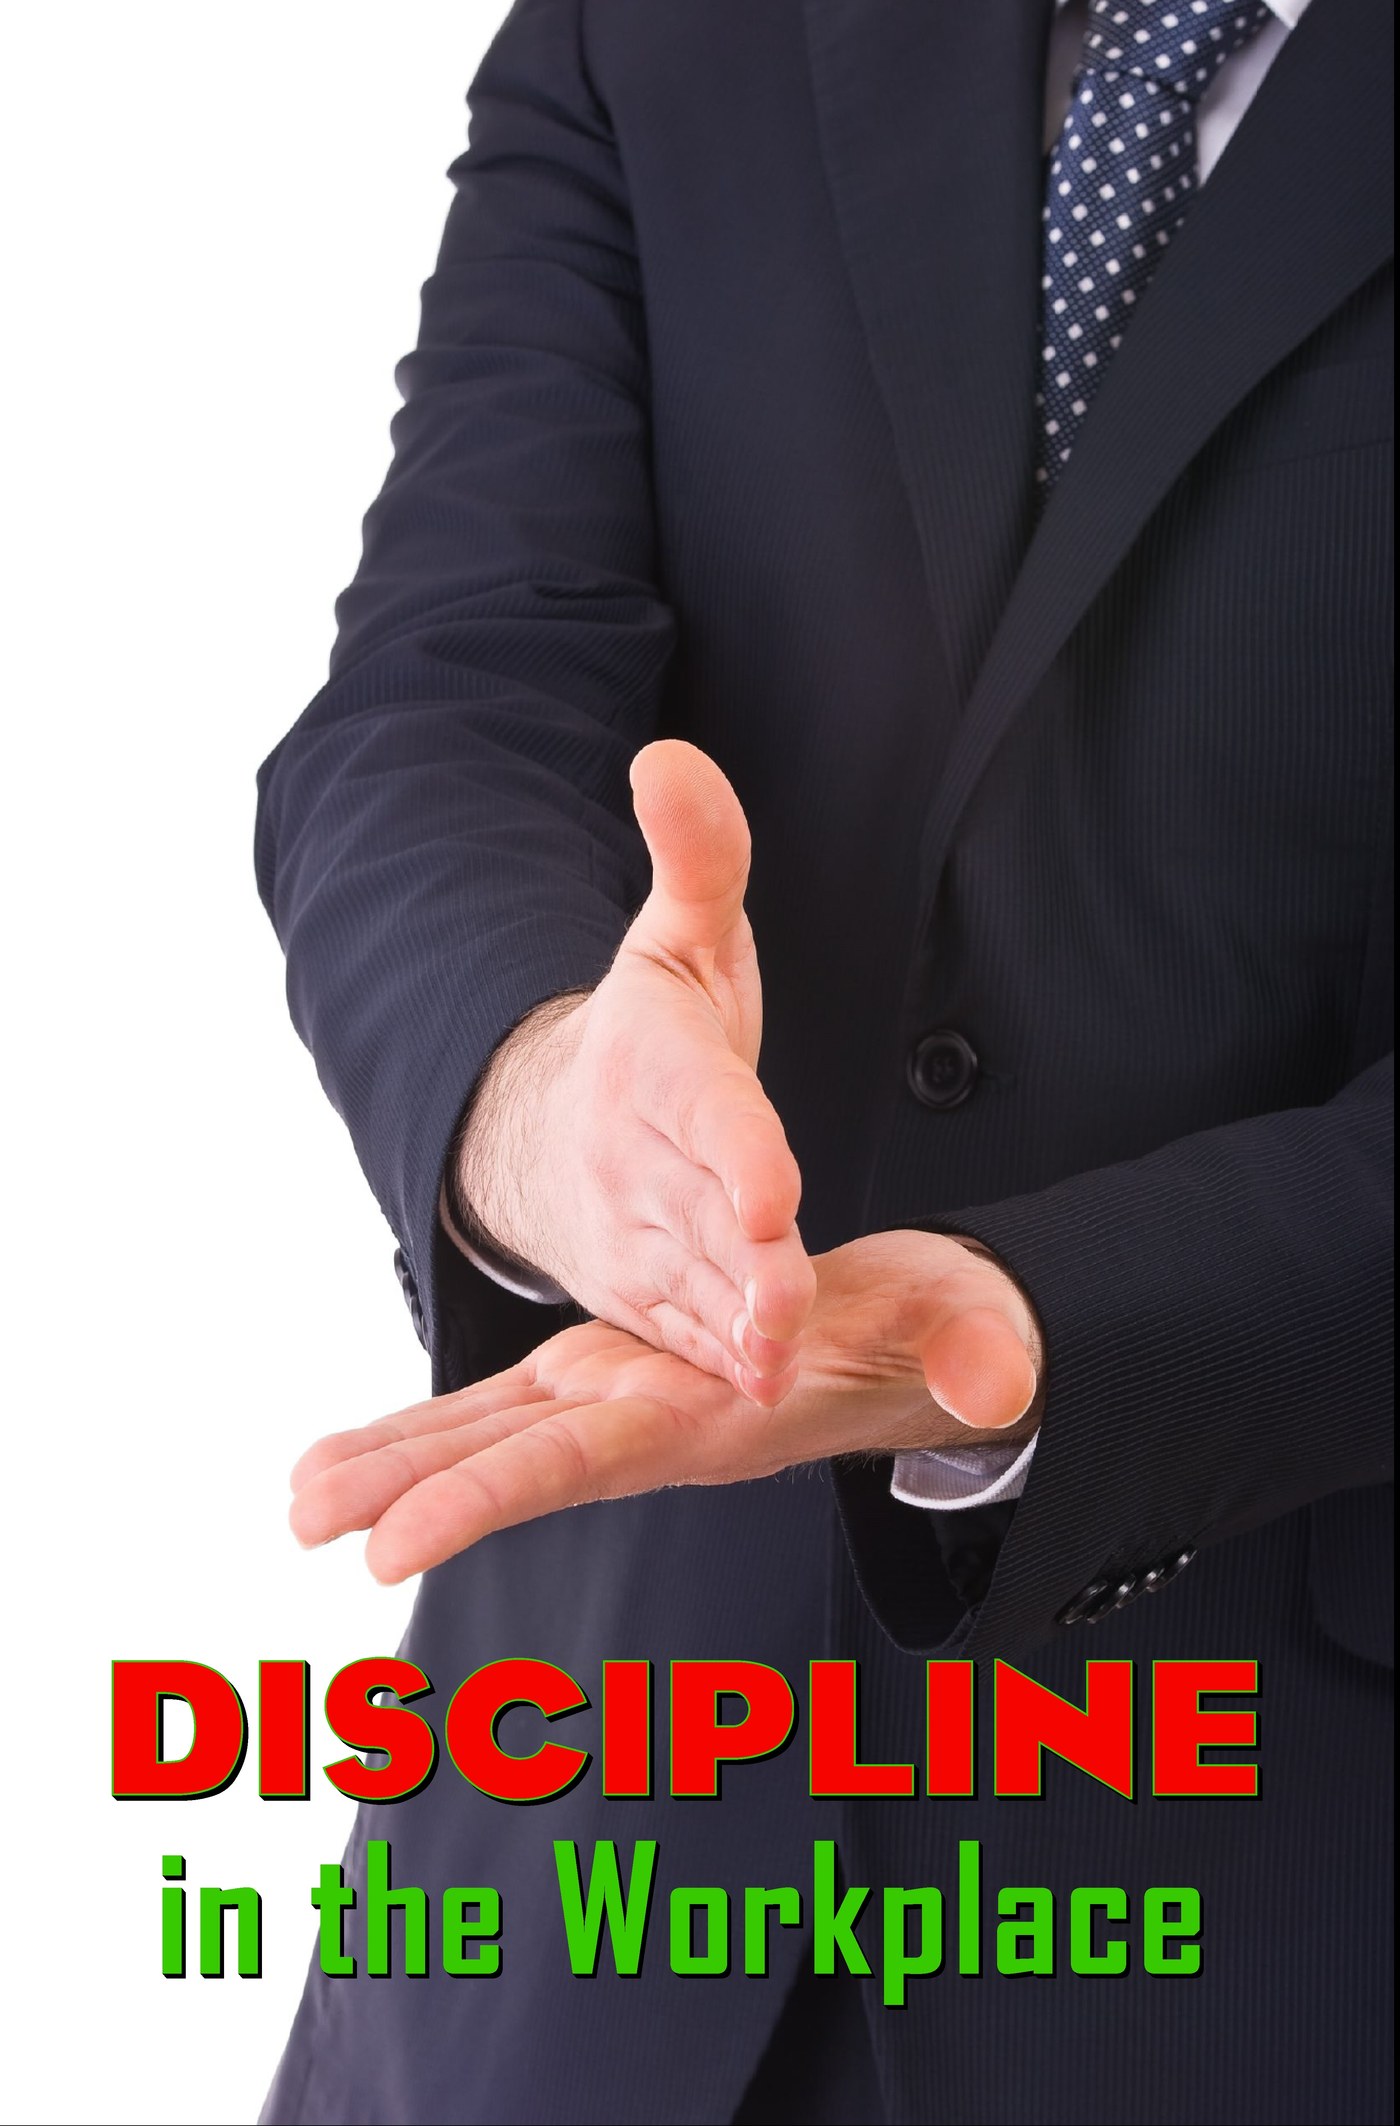 L7055 - Discipline in the Workplace